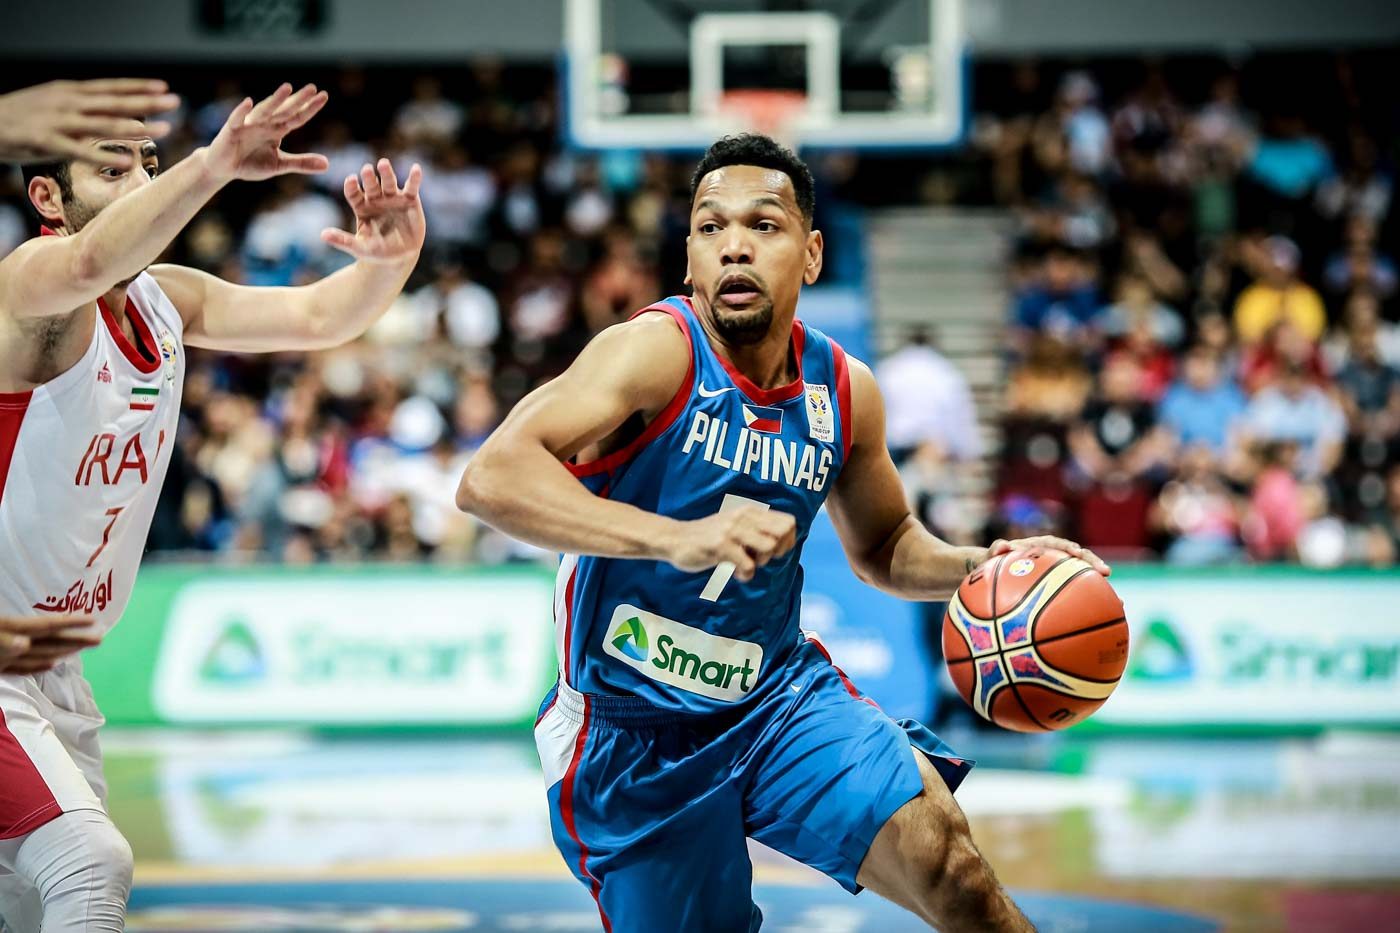 Double whammy for Jayson Castro as he sustains injury in Gilas loss